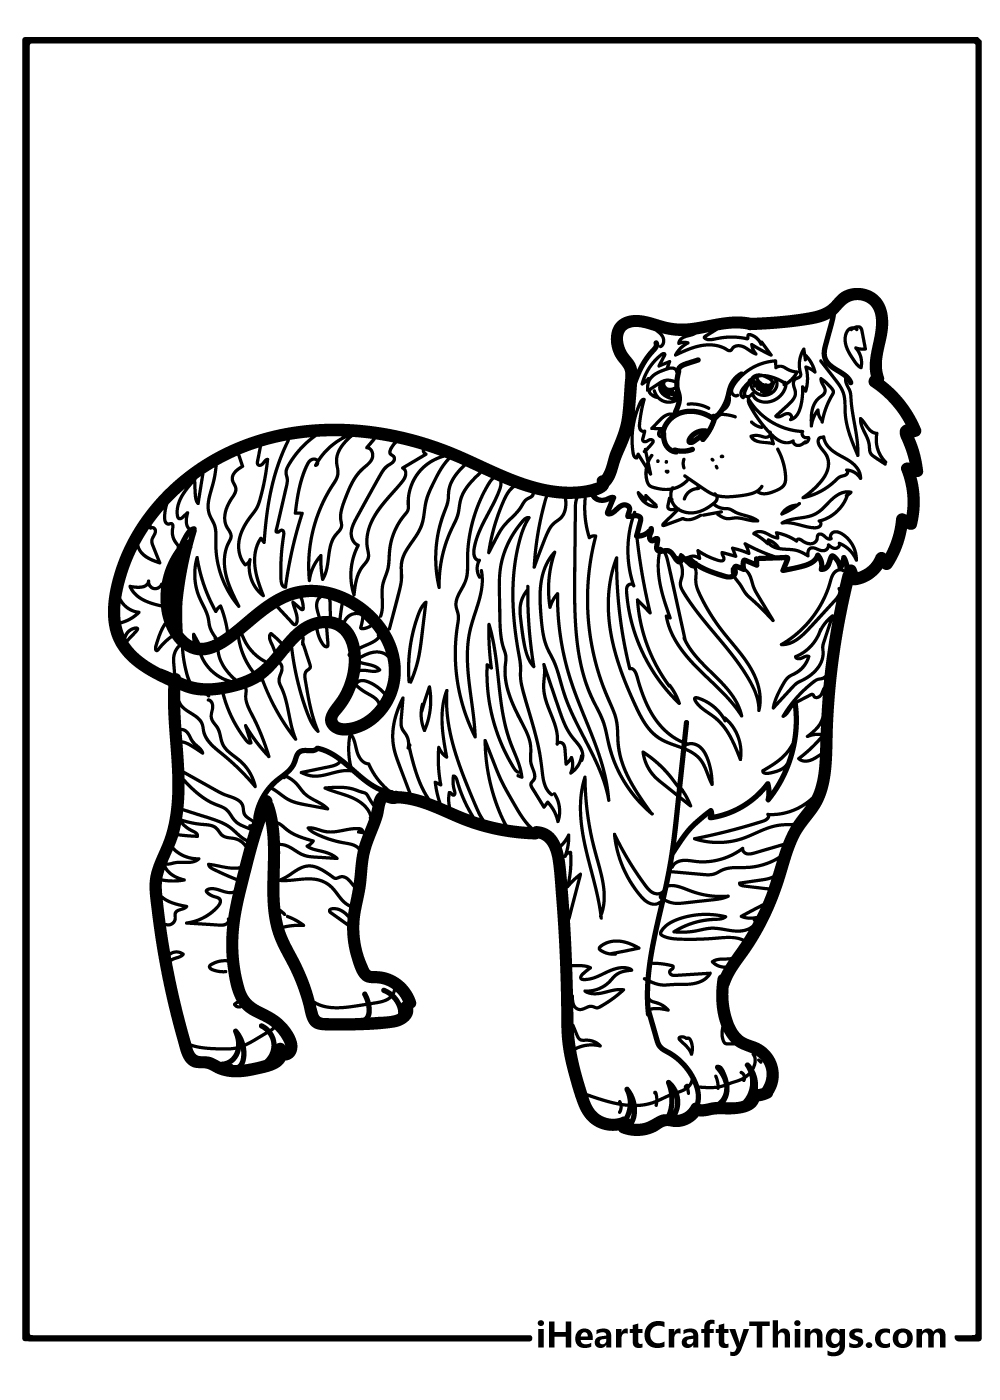 Printable Tiger Coloring Pages Updated 20